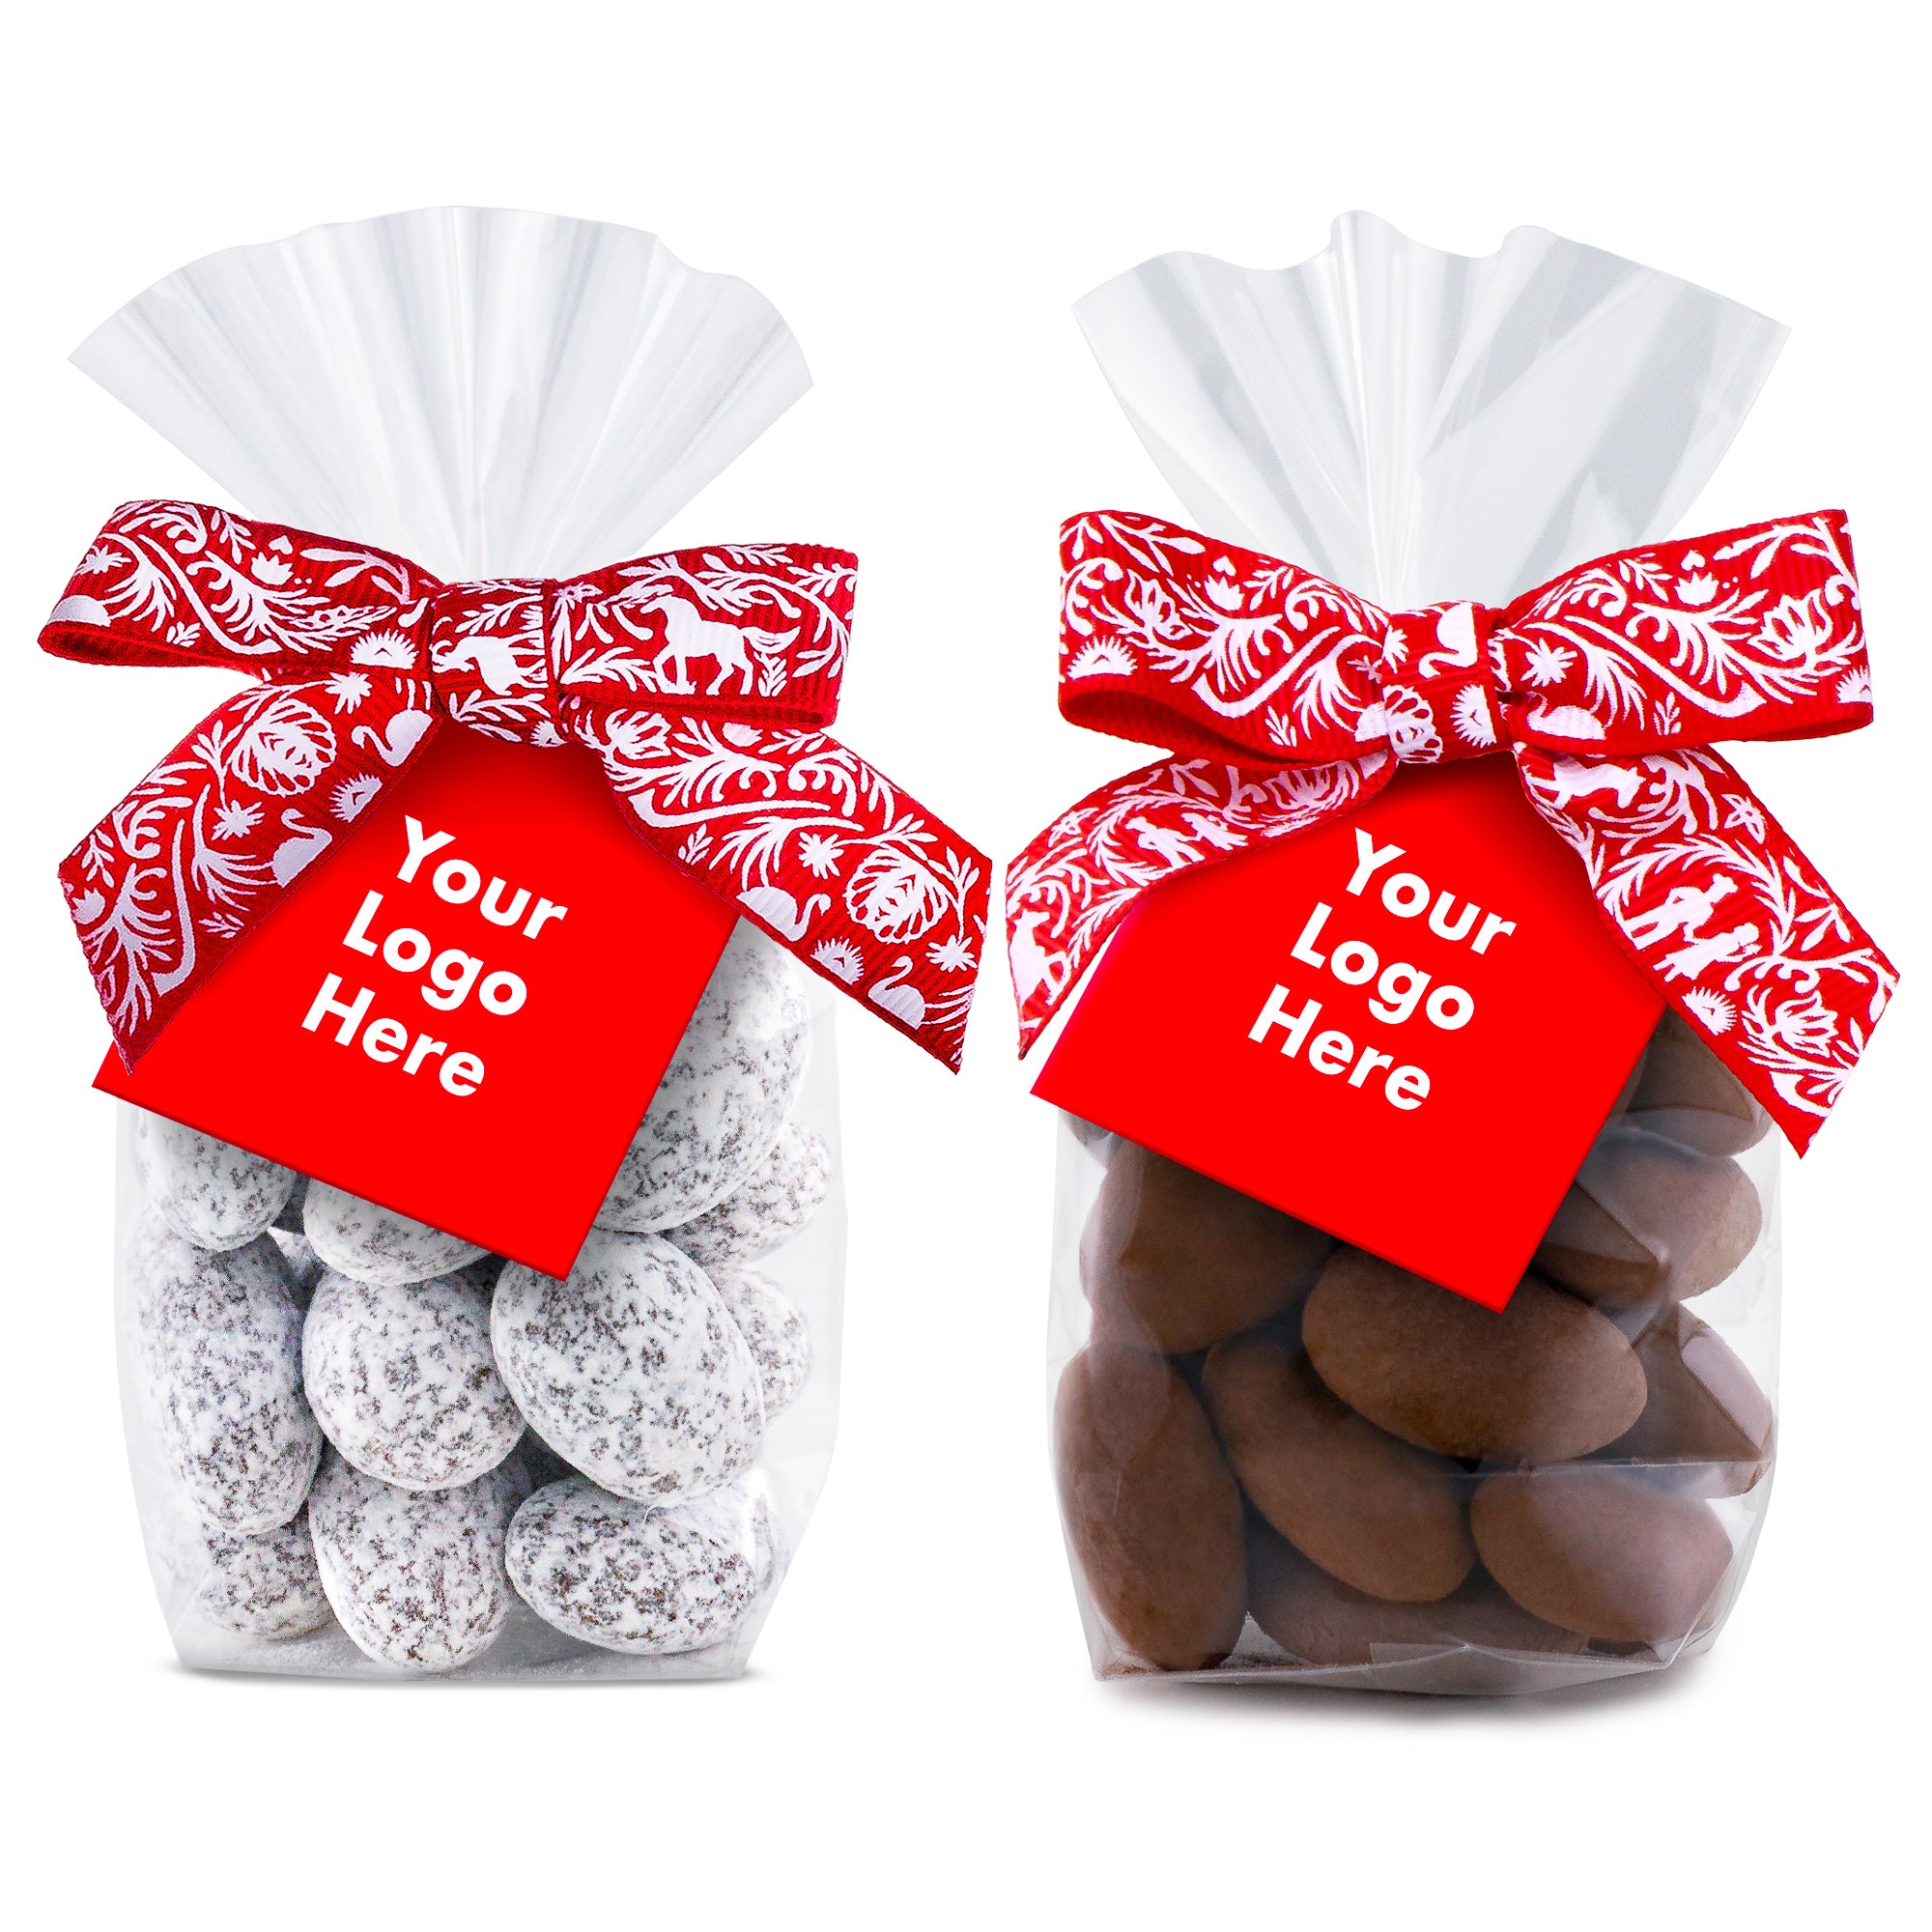 Chocolate Almonds - Favor bags with custom tags - Call to order